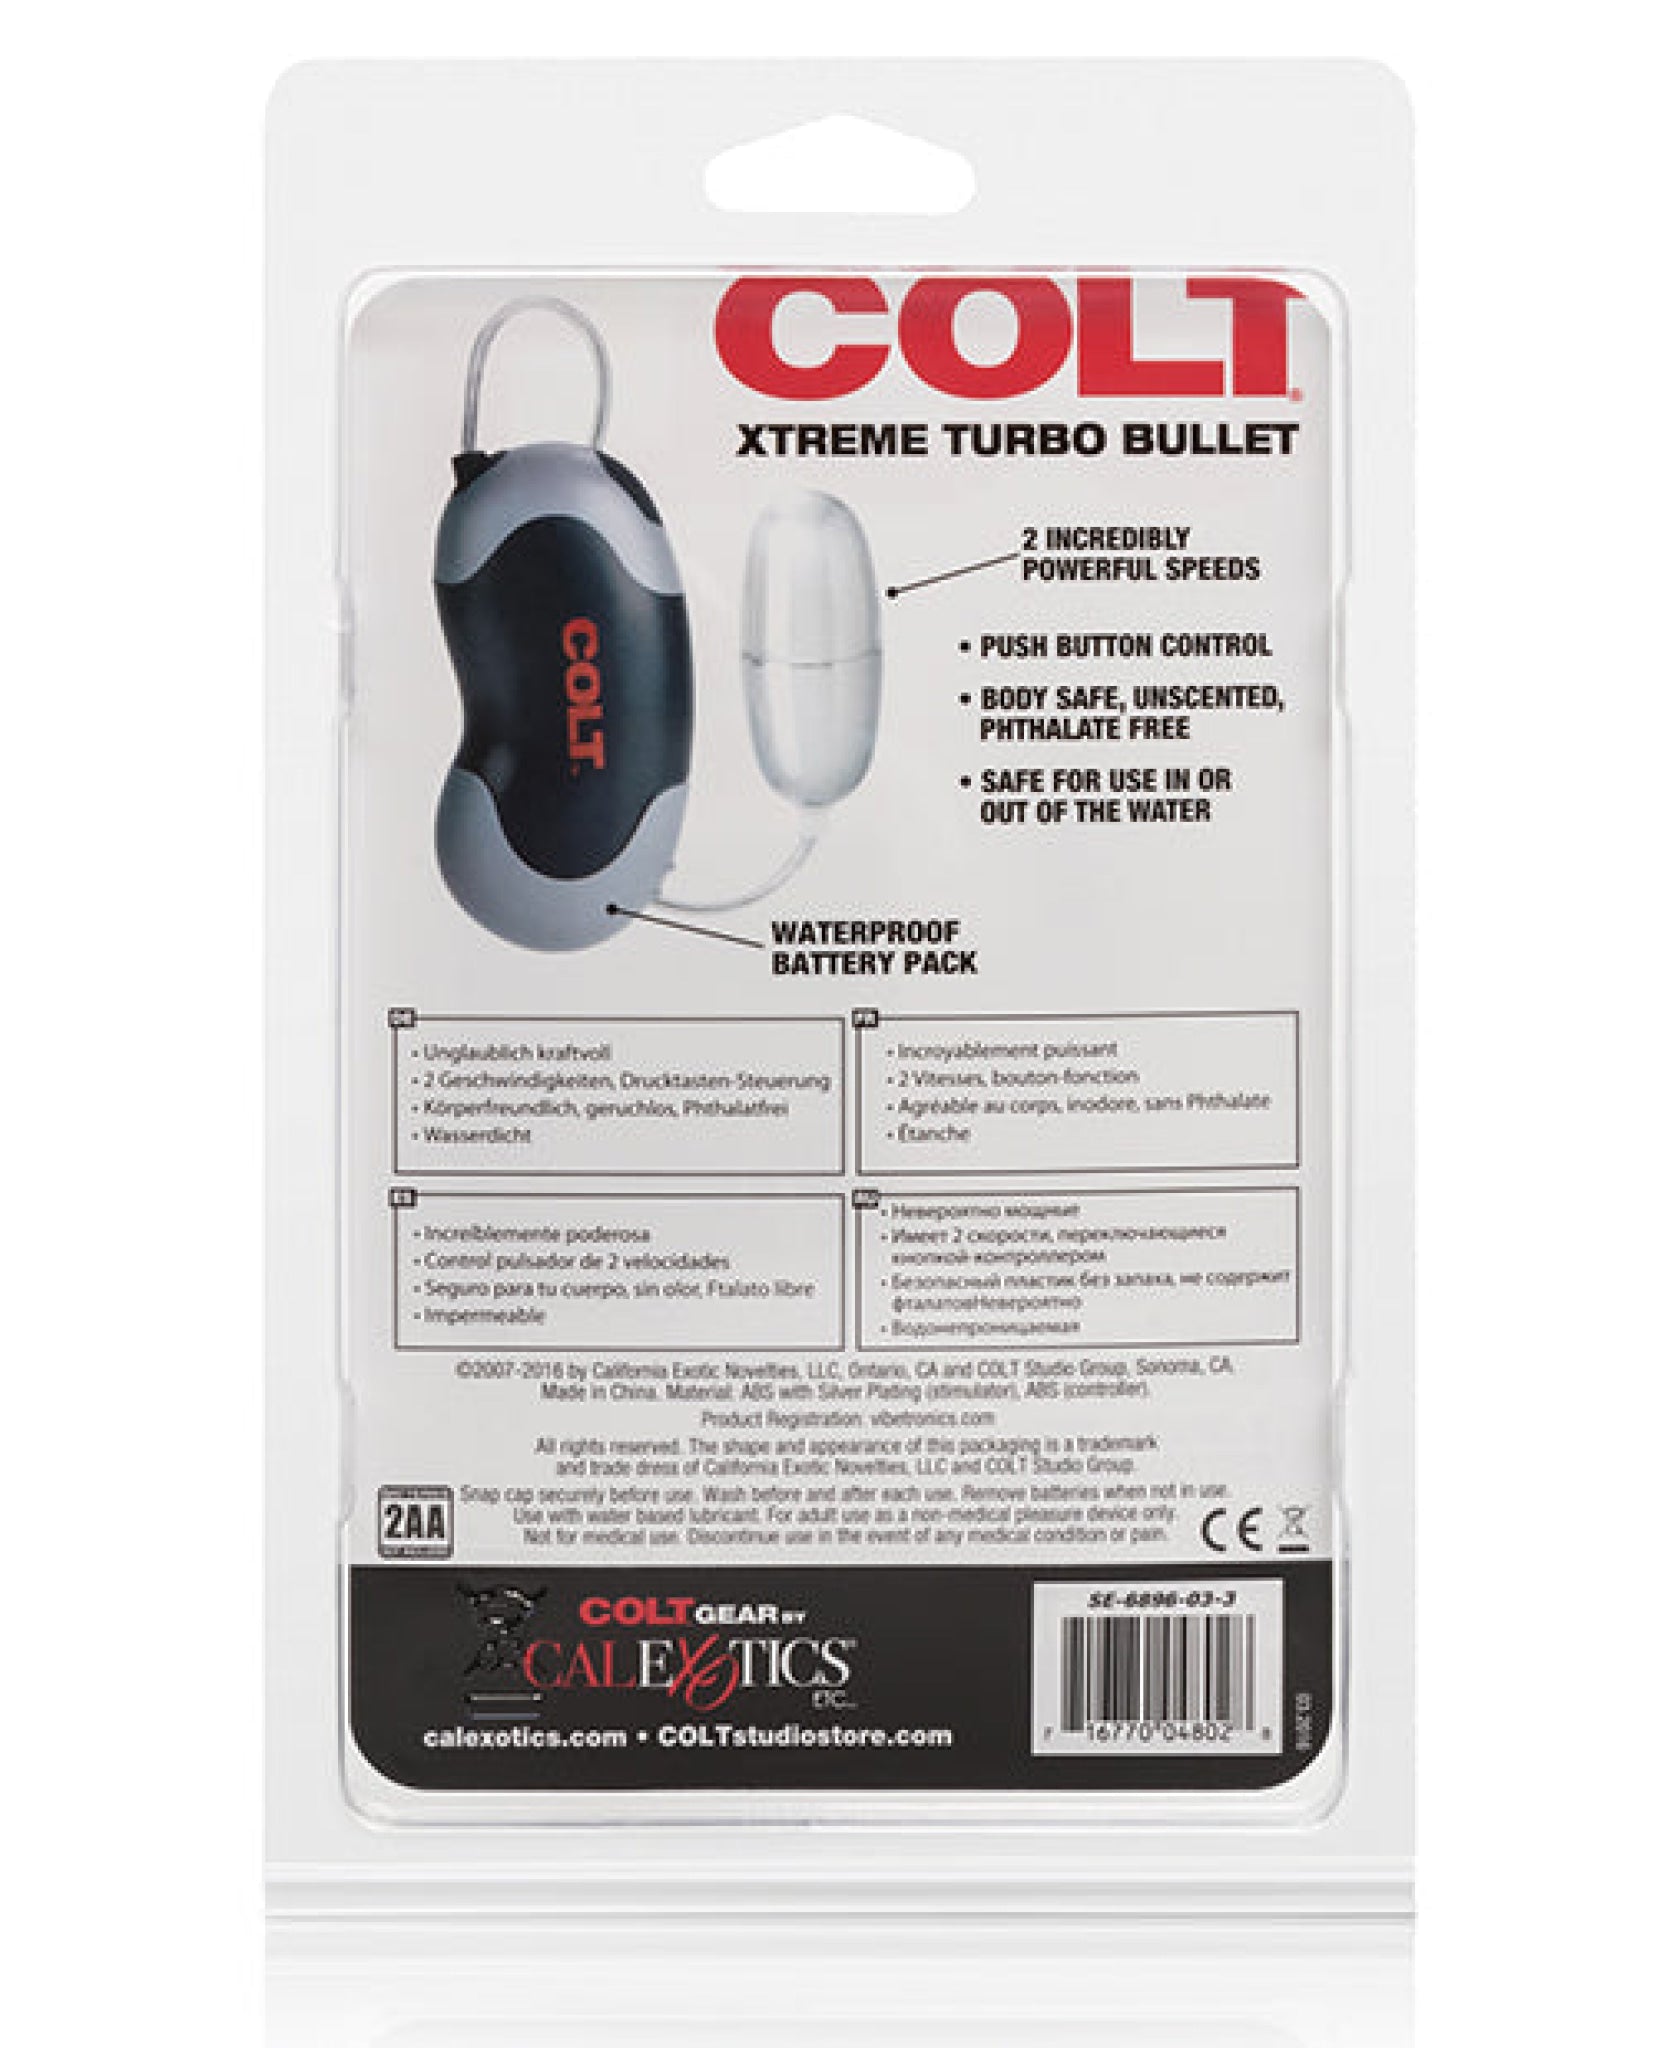 Colt Xtreme Turbo Bullet Power Pack Waterproof - 2 Speed Silver California Exotic Novelties